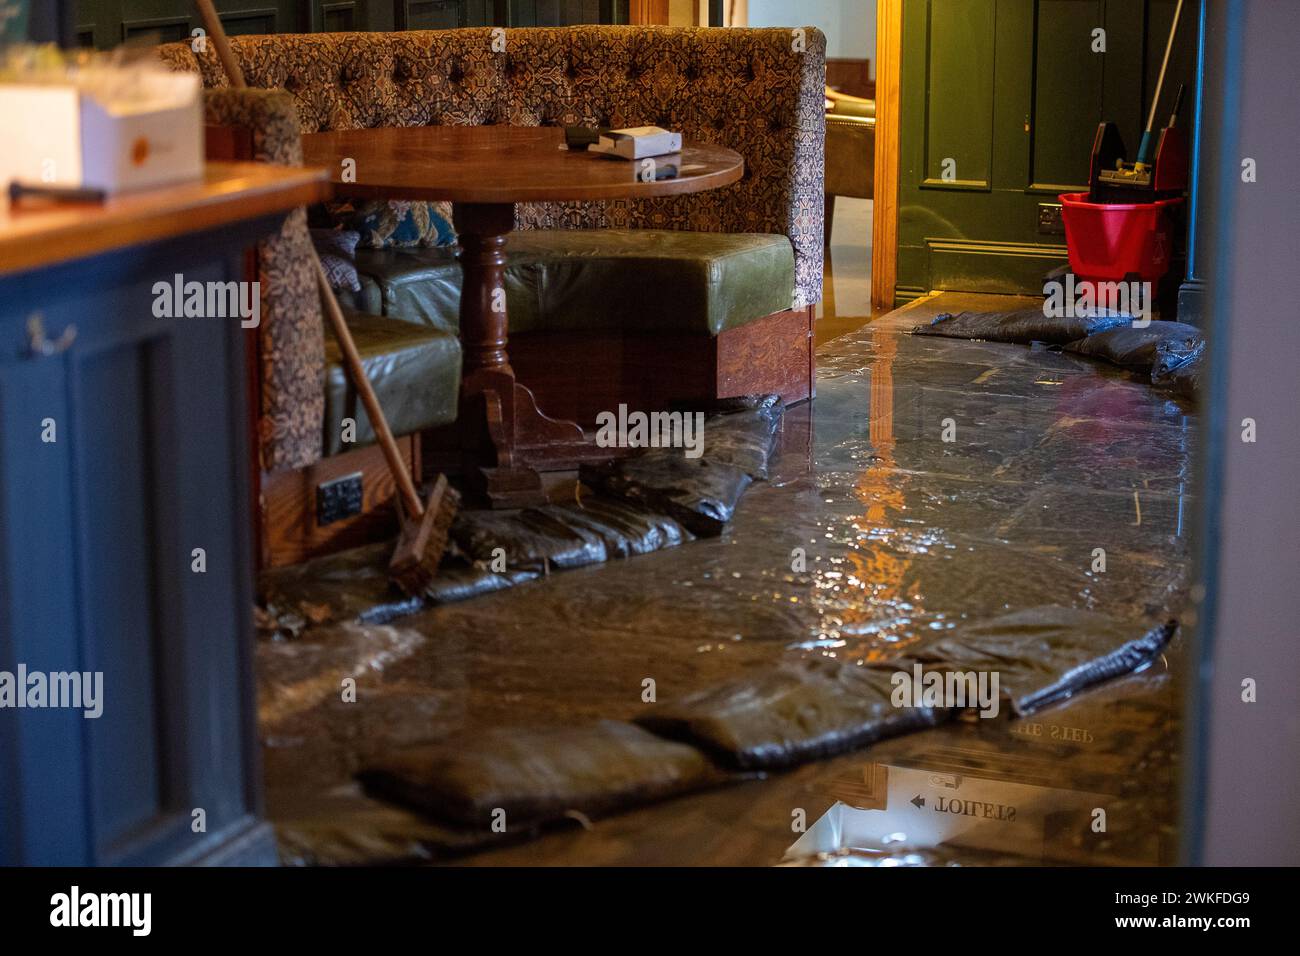 Chalfont St Peter, UK. 18th February, 2024. Groundwater from the River Misbourne has flooded up through the floor and into the pub toilets at the Greyhound Inn pub in the village of Chalfont St Peter. The pub has been forced to close. Thames Water have been outside the pub pumping away water for a number of weeks now. The flooding was worse again today following overnight rain. Although the area has flooded before, many locals believe the reason for the extensive flooding this time allegedly relates to HS2 who have been tunnelling underground in the region for the High Speed Rail. Credit: Maur Stock Photo